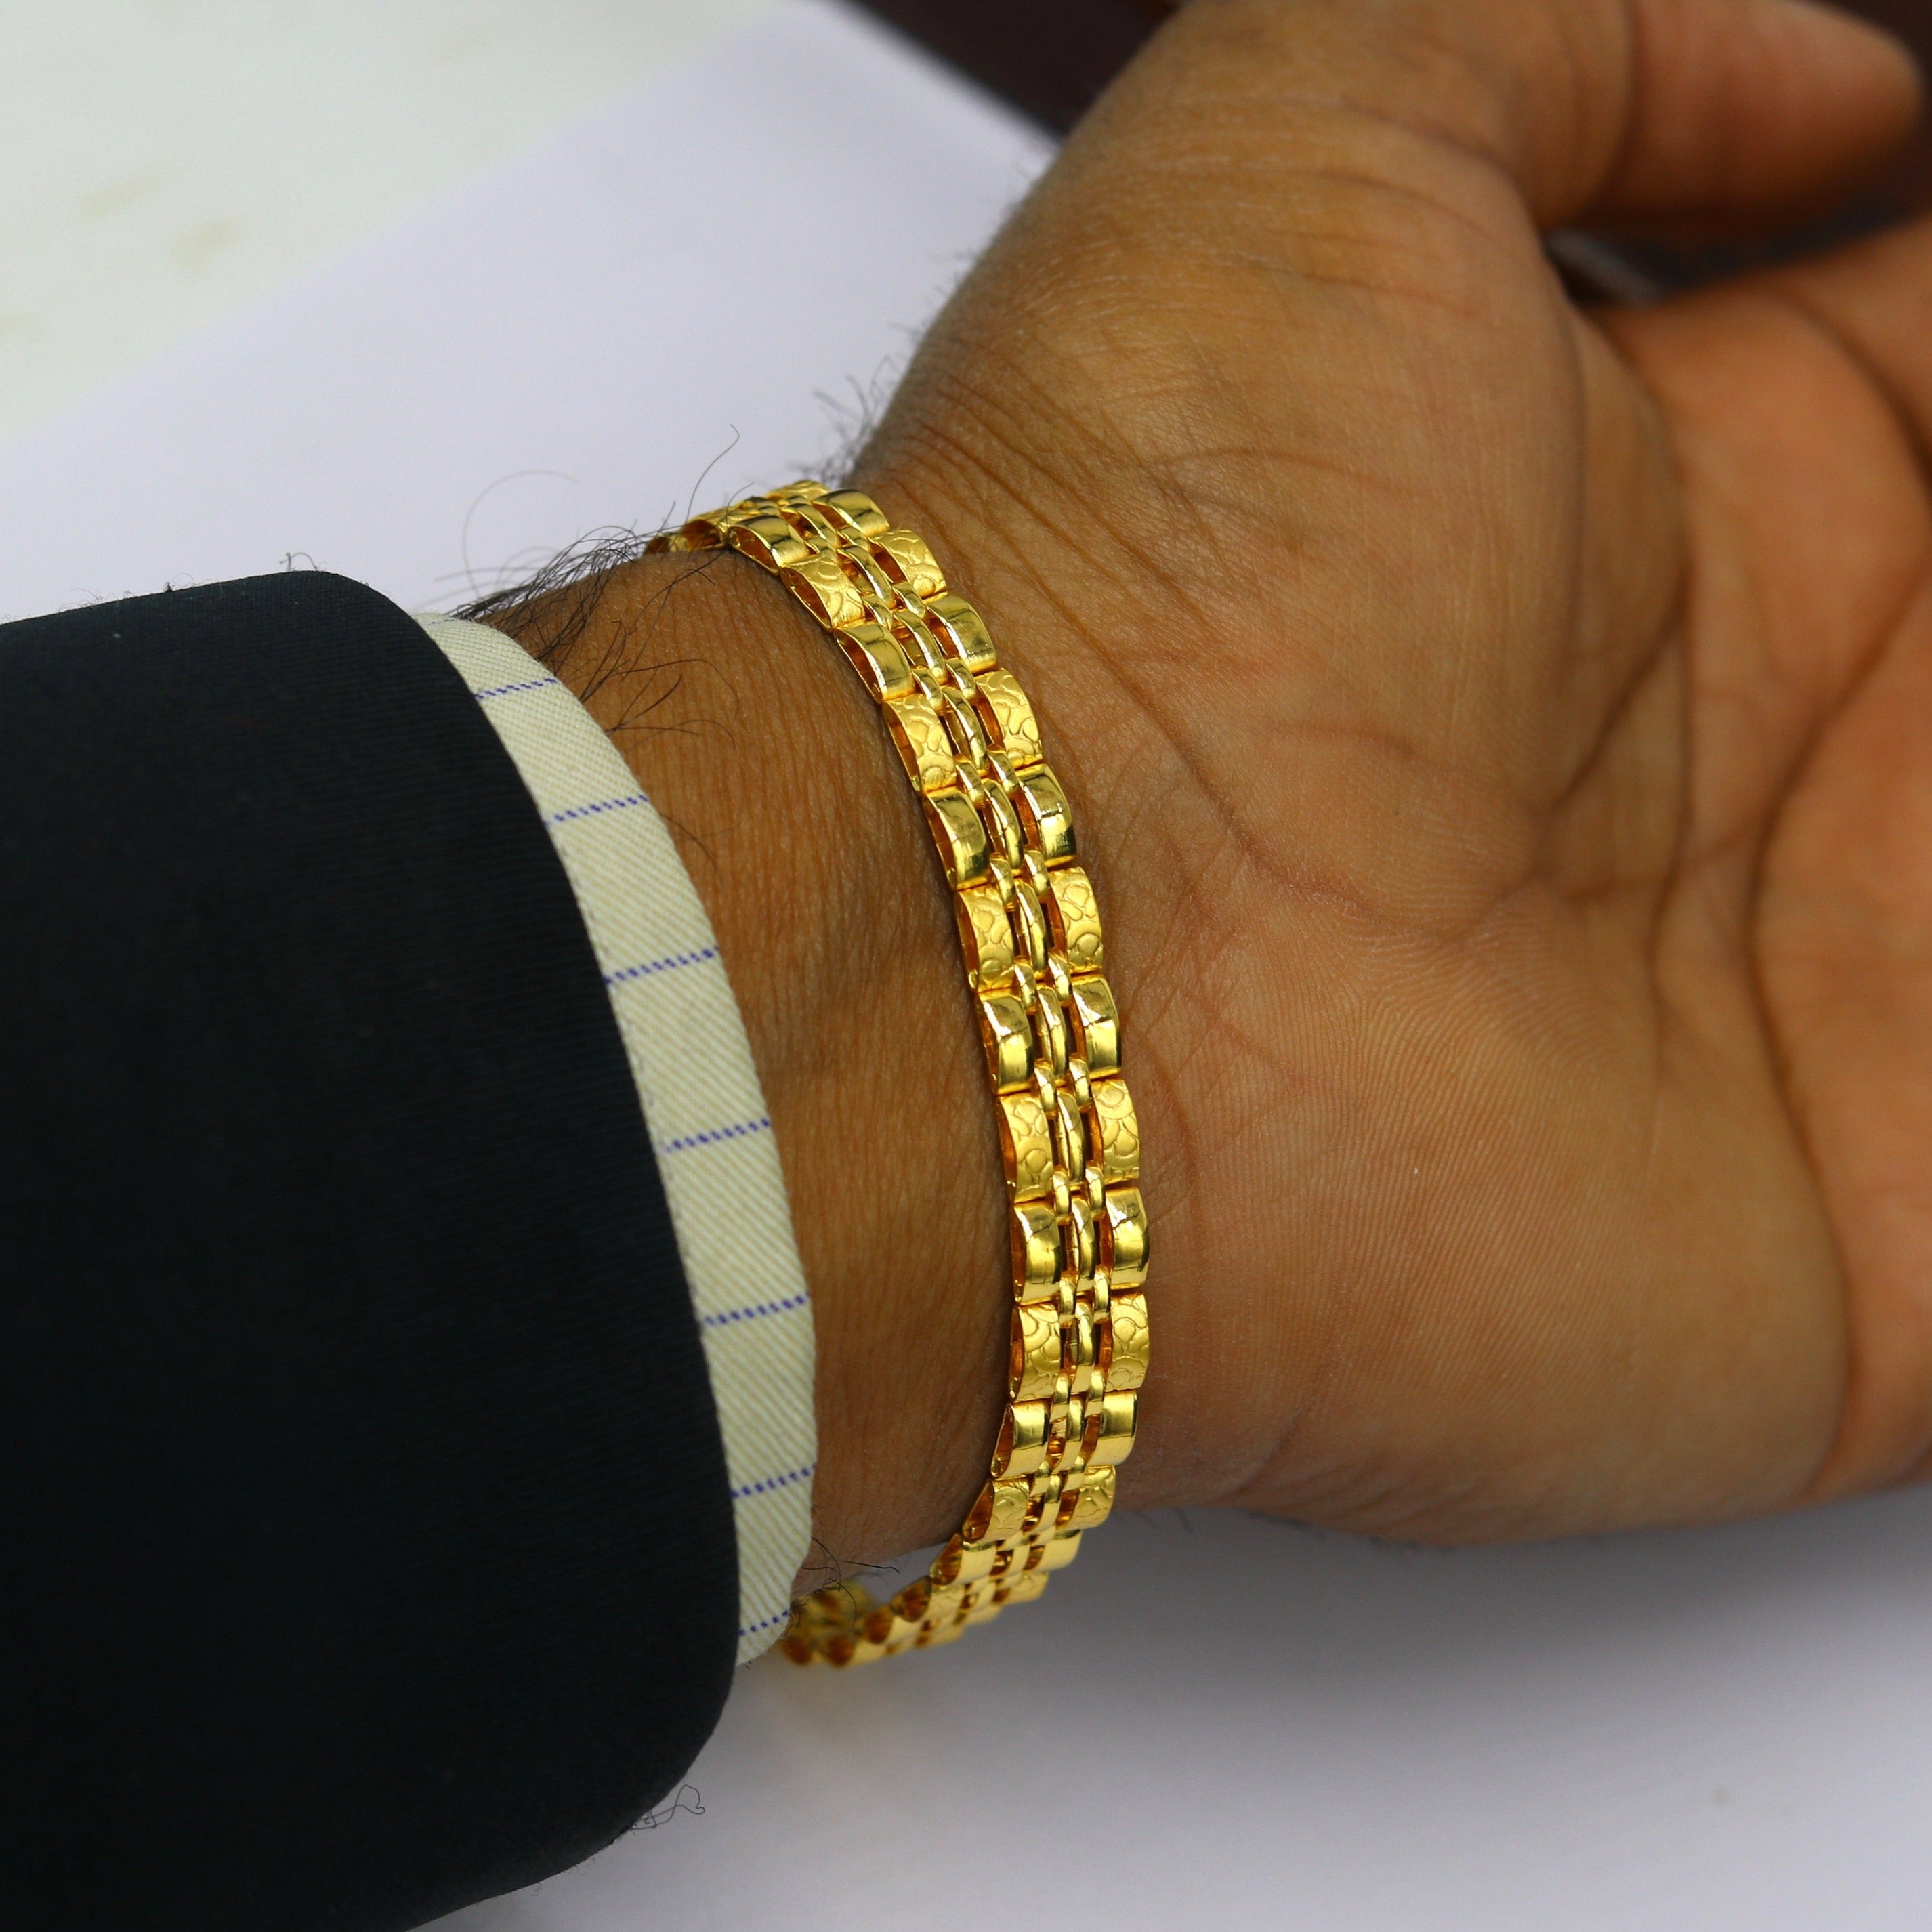 Buy 2 to 4 Gram Gold Bracelets for Women from 100 Designs Online at Best  Price